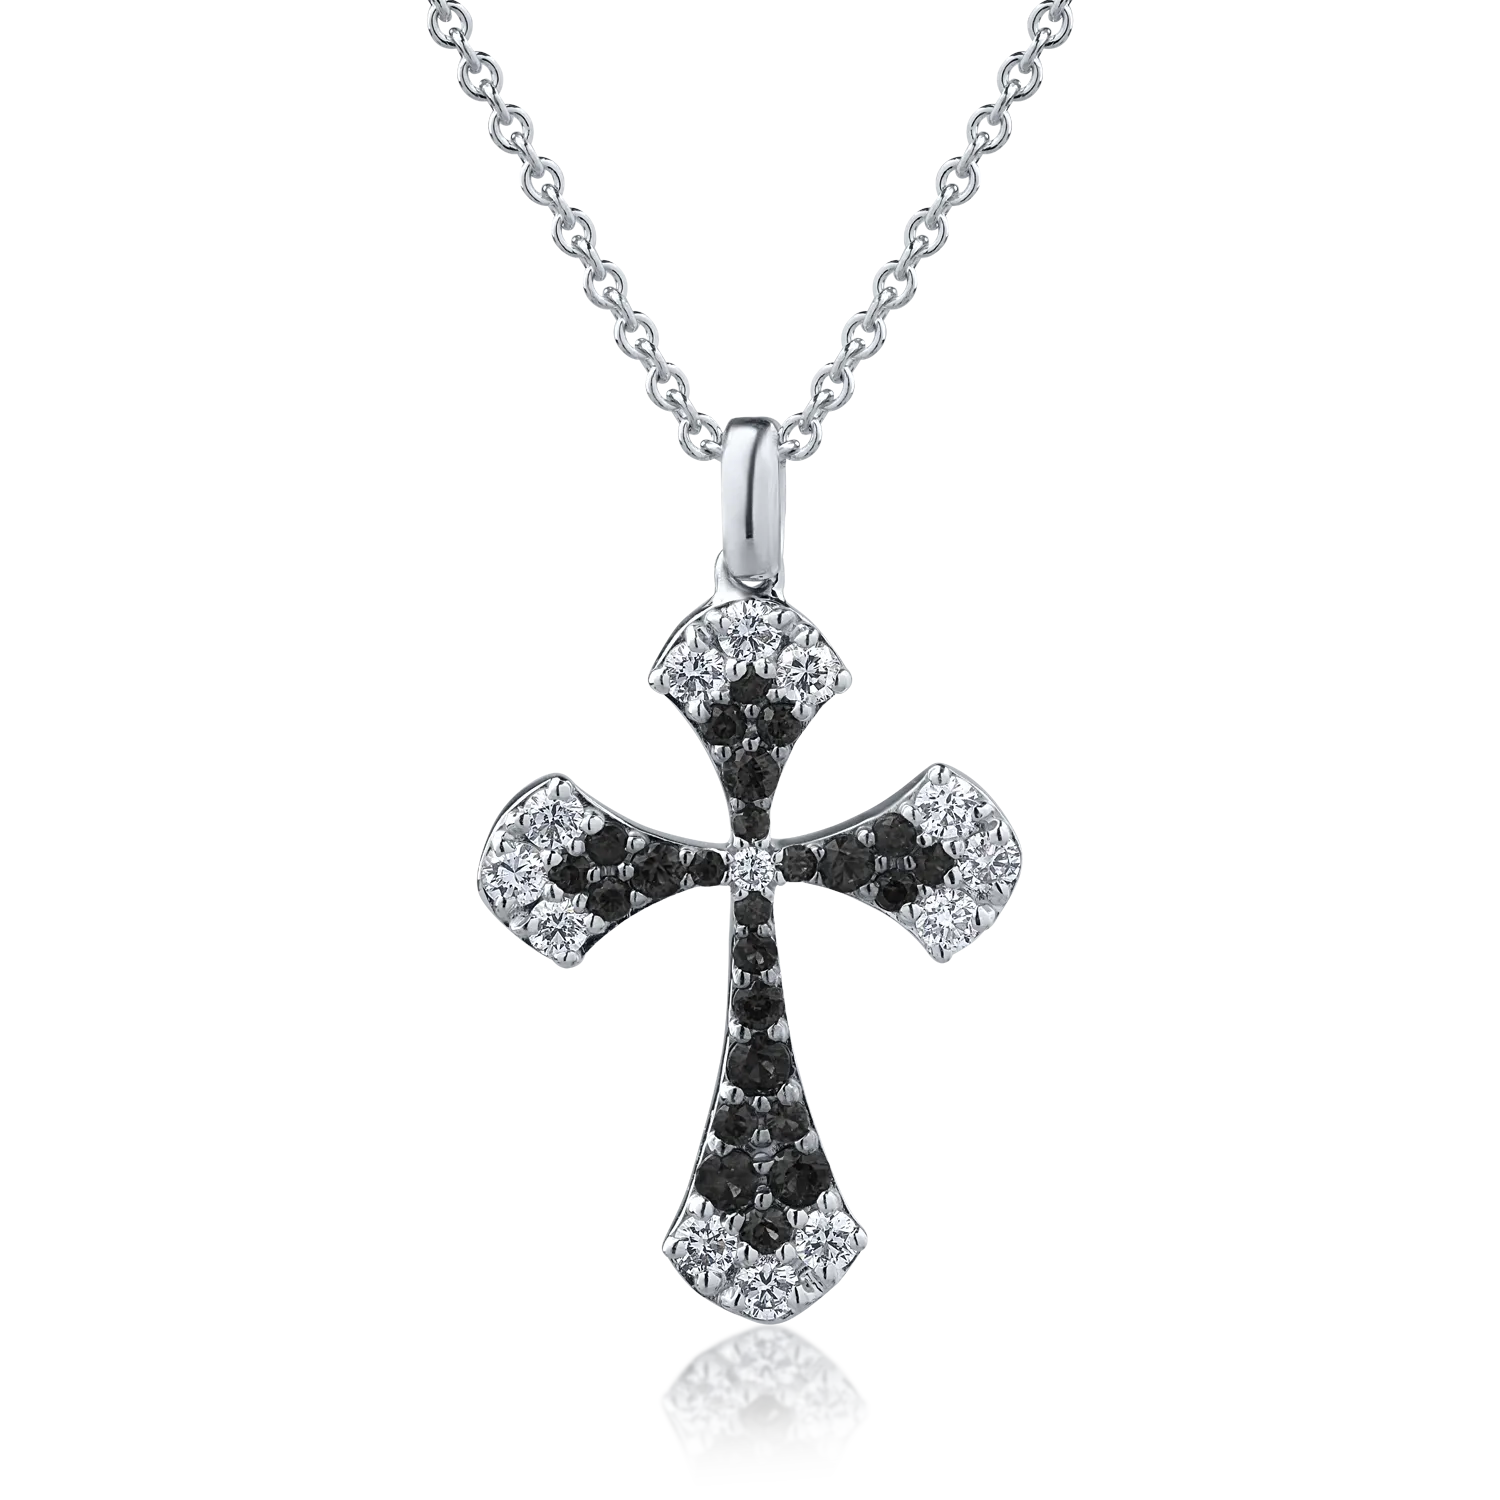 18K white gold cross pendant necklace with 0.42ct clear diamonds and 0.45ct black diamonds